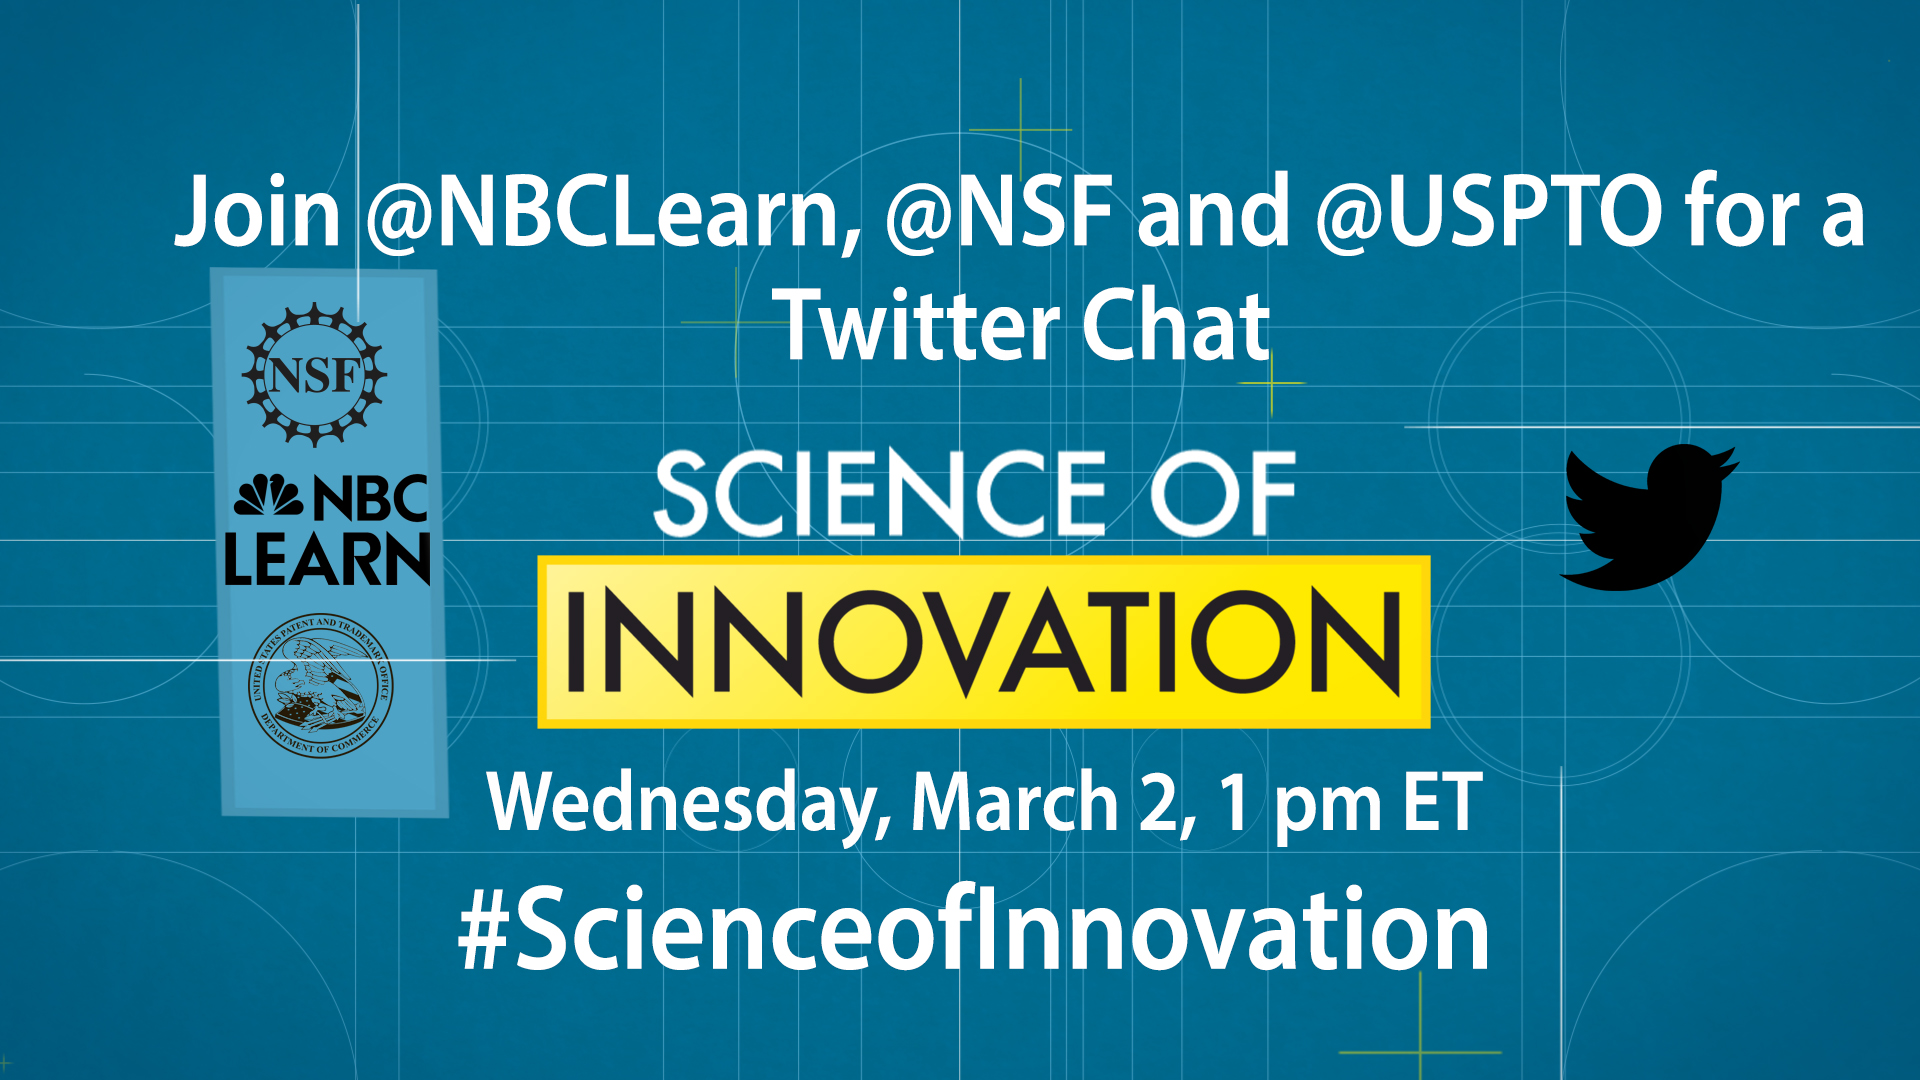 Join NBC Learn, NSF and USPTO for a Twitter Chat on Science of Innovation, Wednesday March 2 at 1 PM ET. hashtag, science of innovation